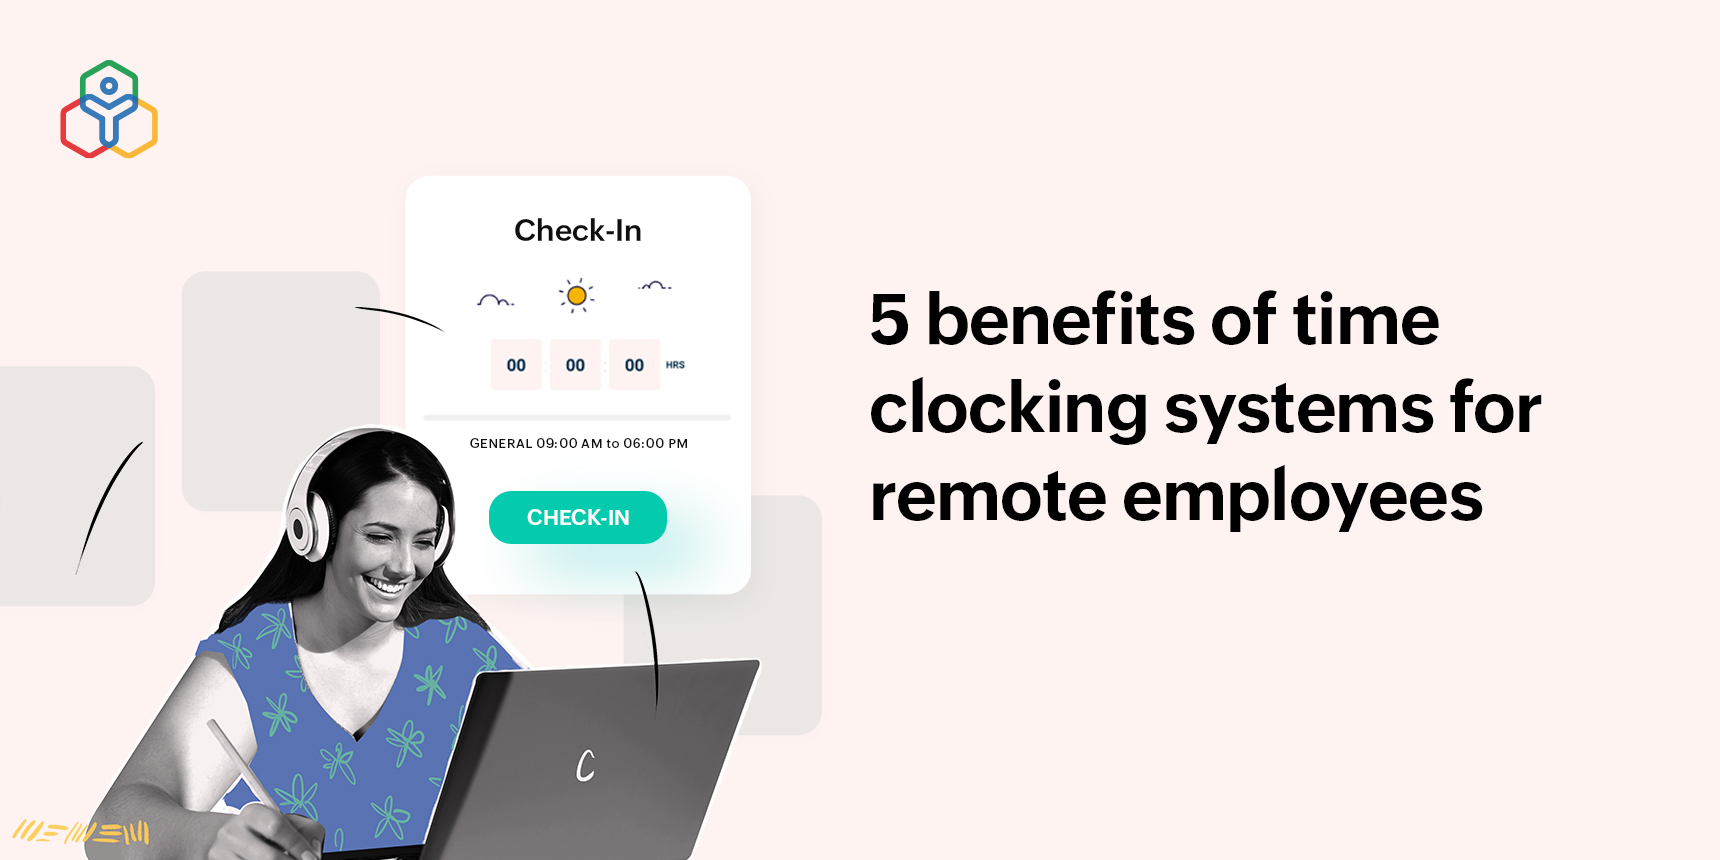 Using time clocking systems to manage remote employee time